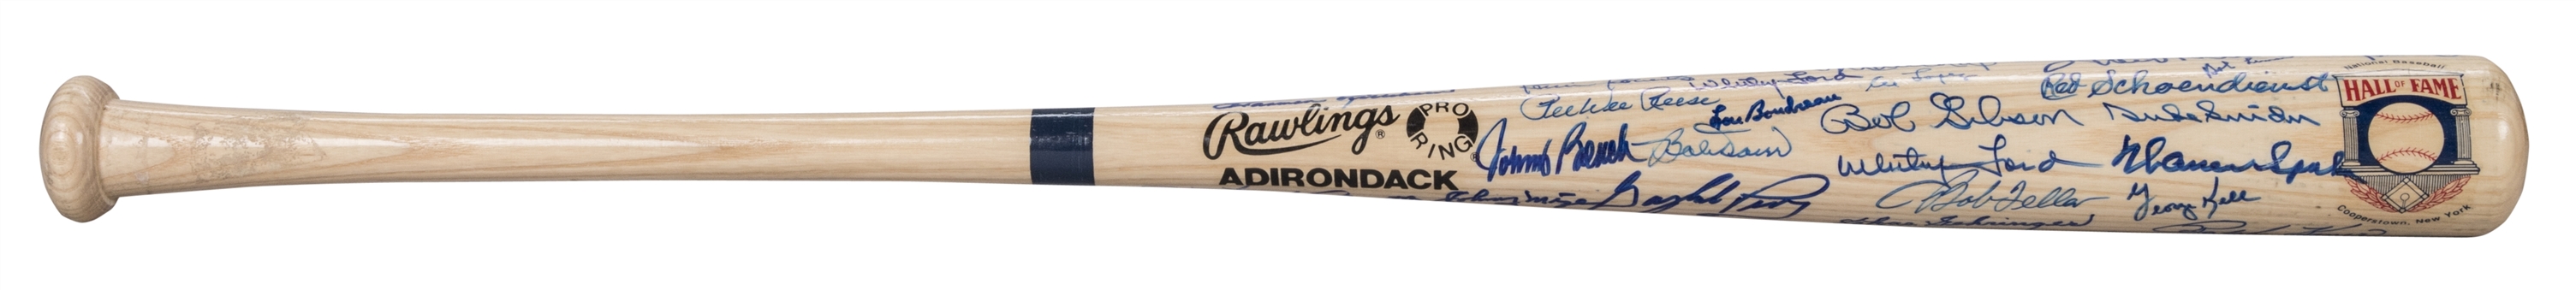 Multi-Signed Hall Of Famers Rawlings/Adirondack National Baseball Hall of Fame Bat With 50 Signatures Including Banks, Aaron, Killebrew & Musial (Beckett)